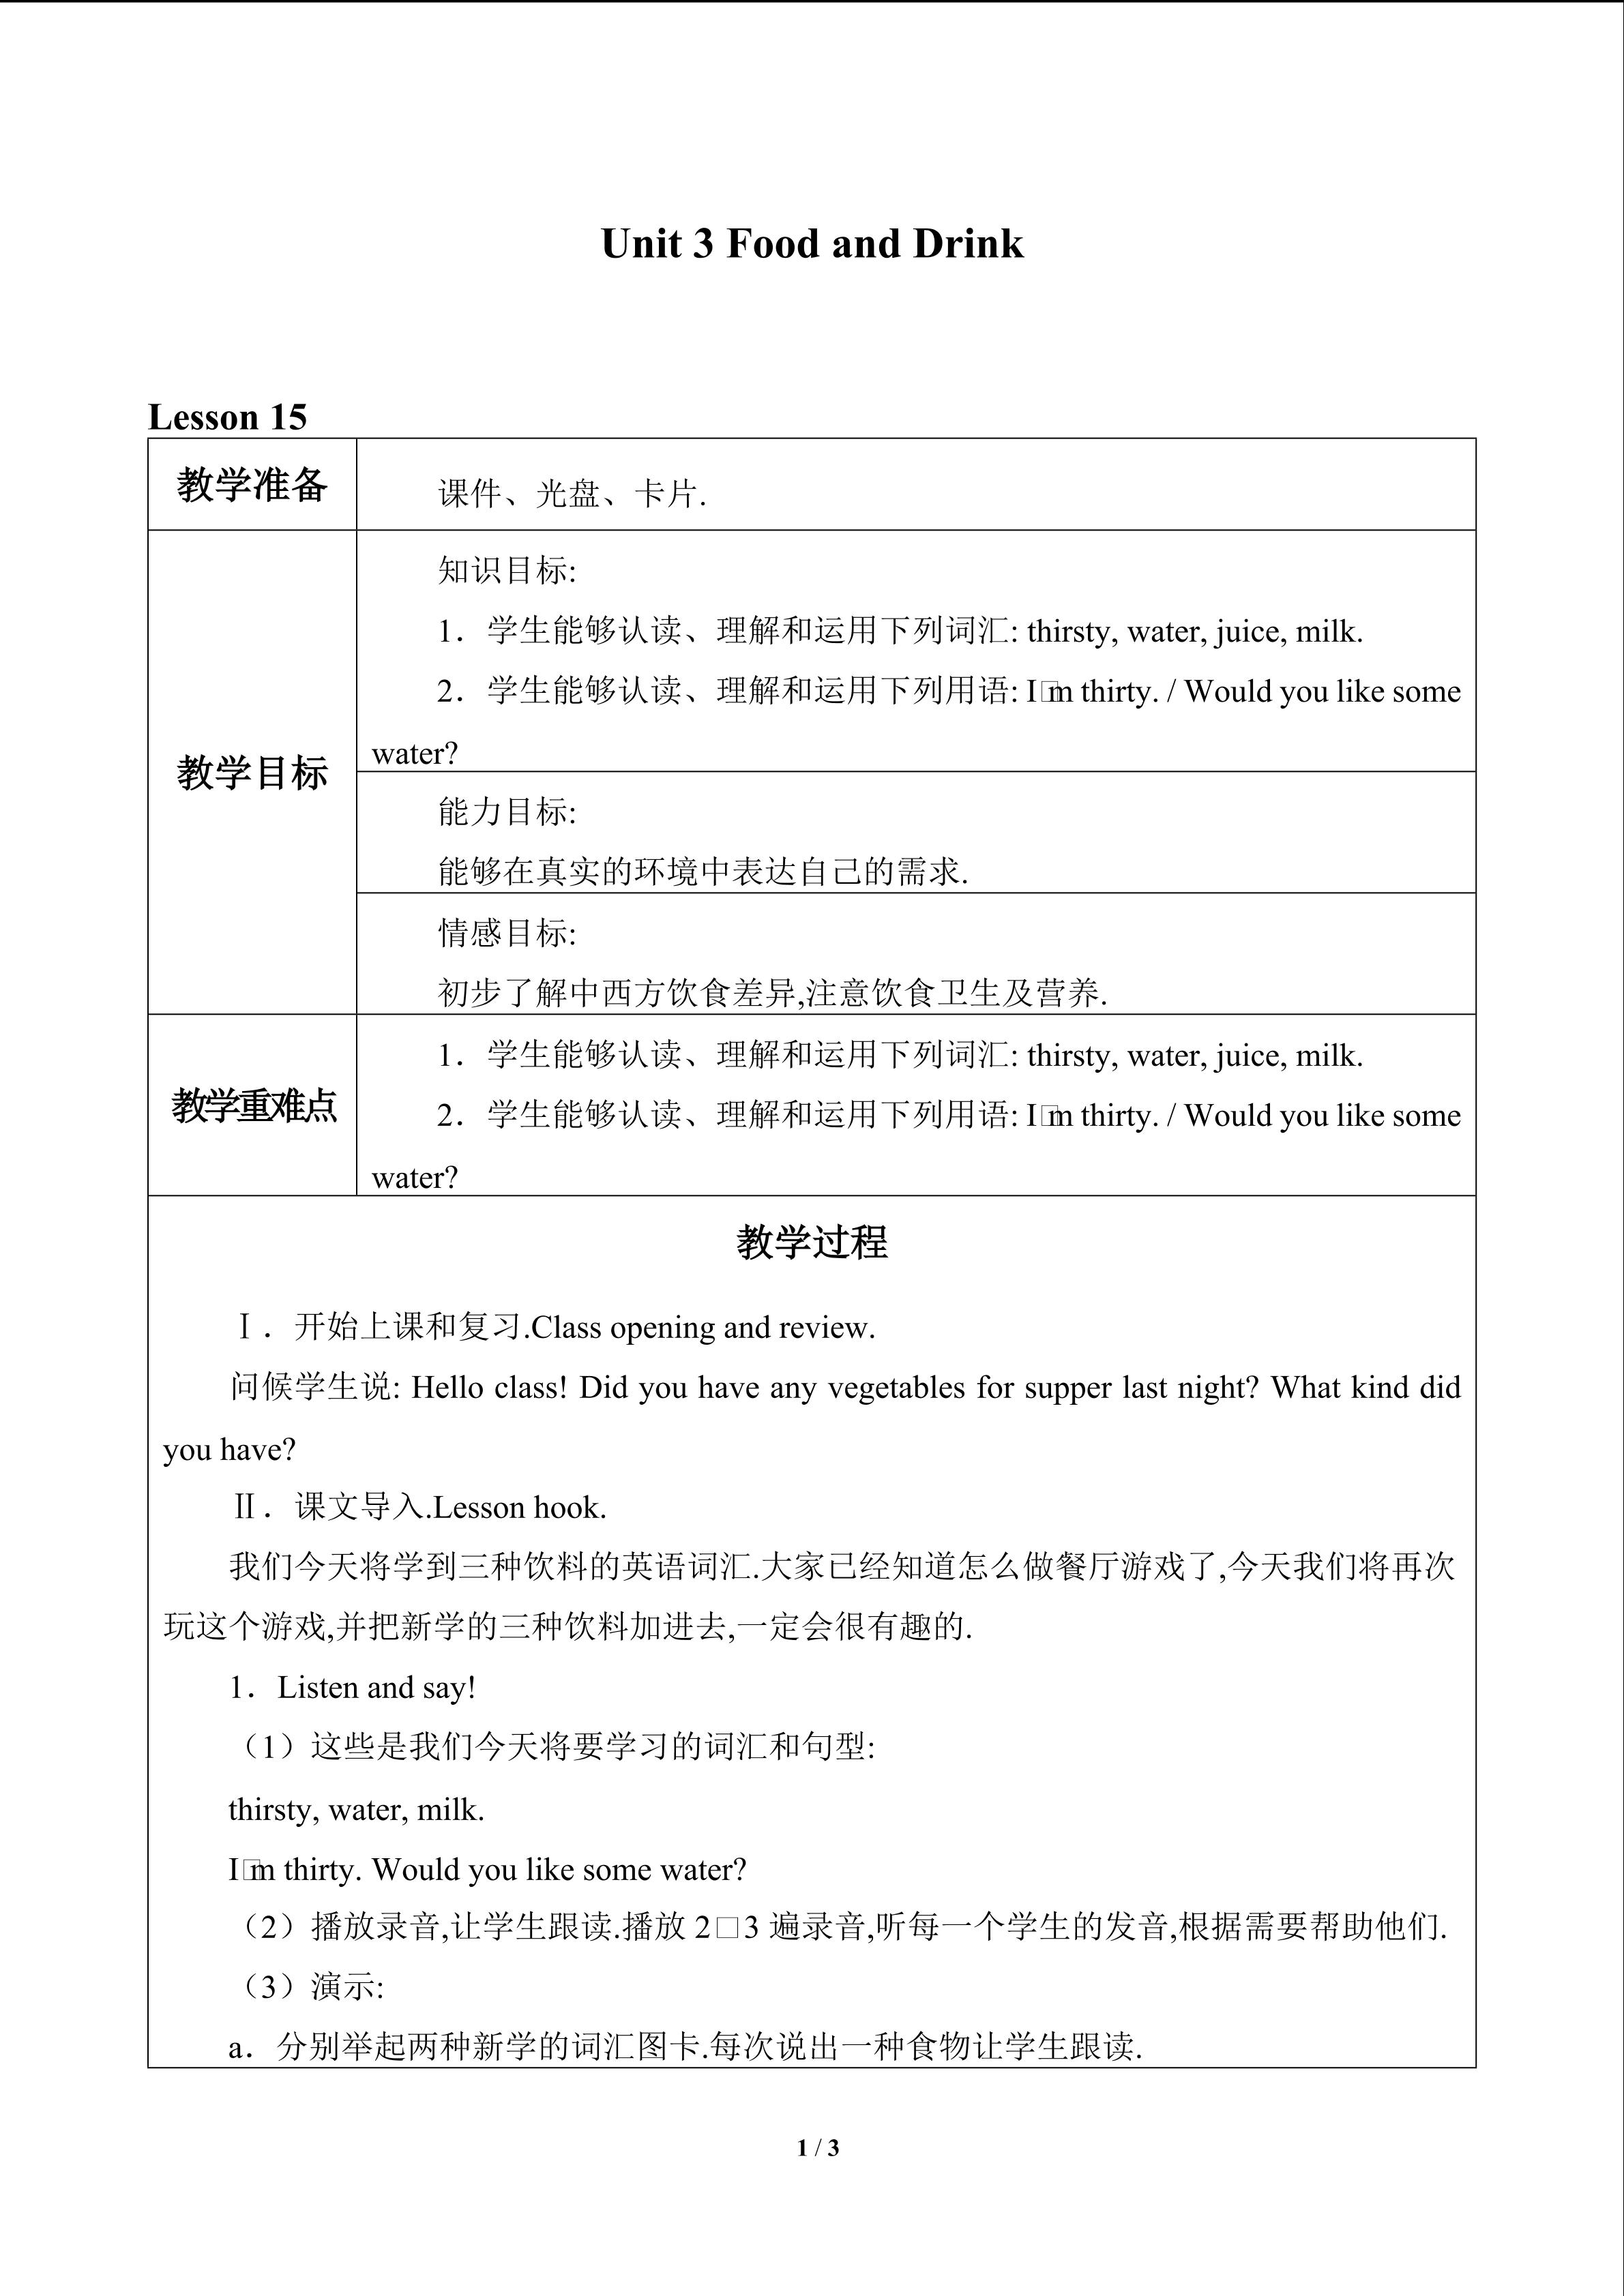 Unit 3 Food and Drink_教案4